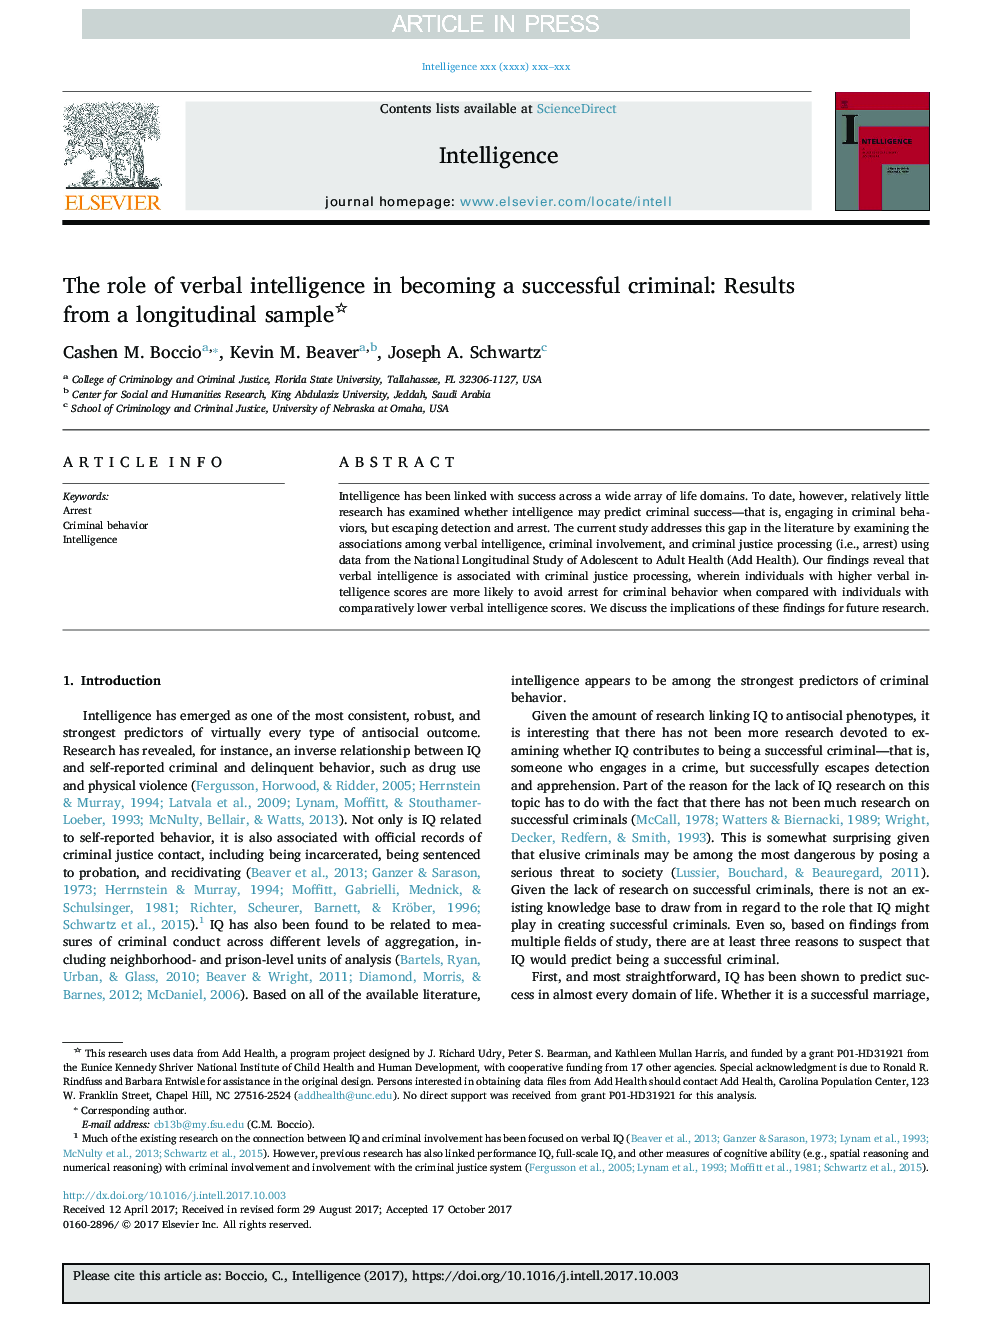 The role of verbal intelligence in becoming a successful criminal: Results from a longitudinal sample